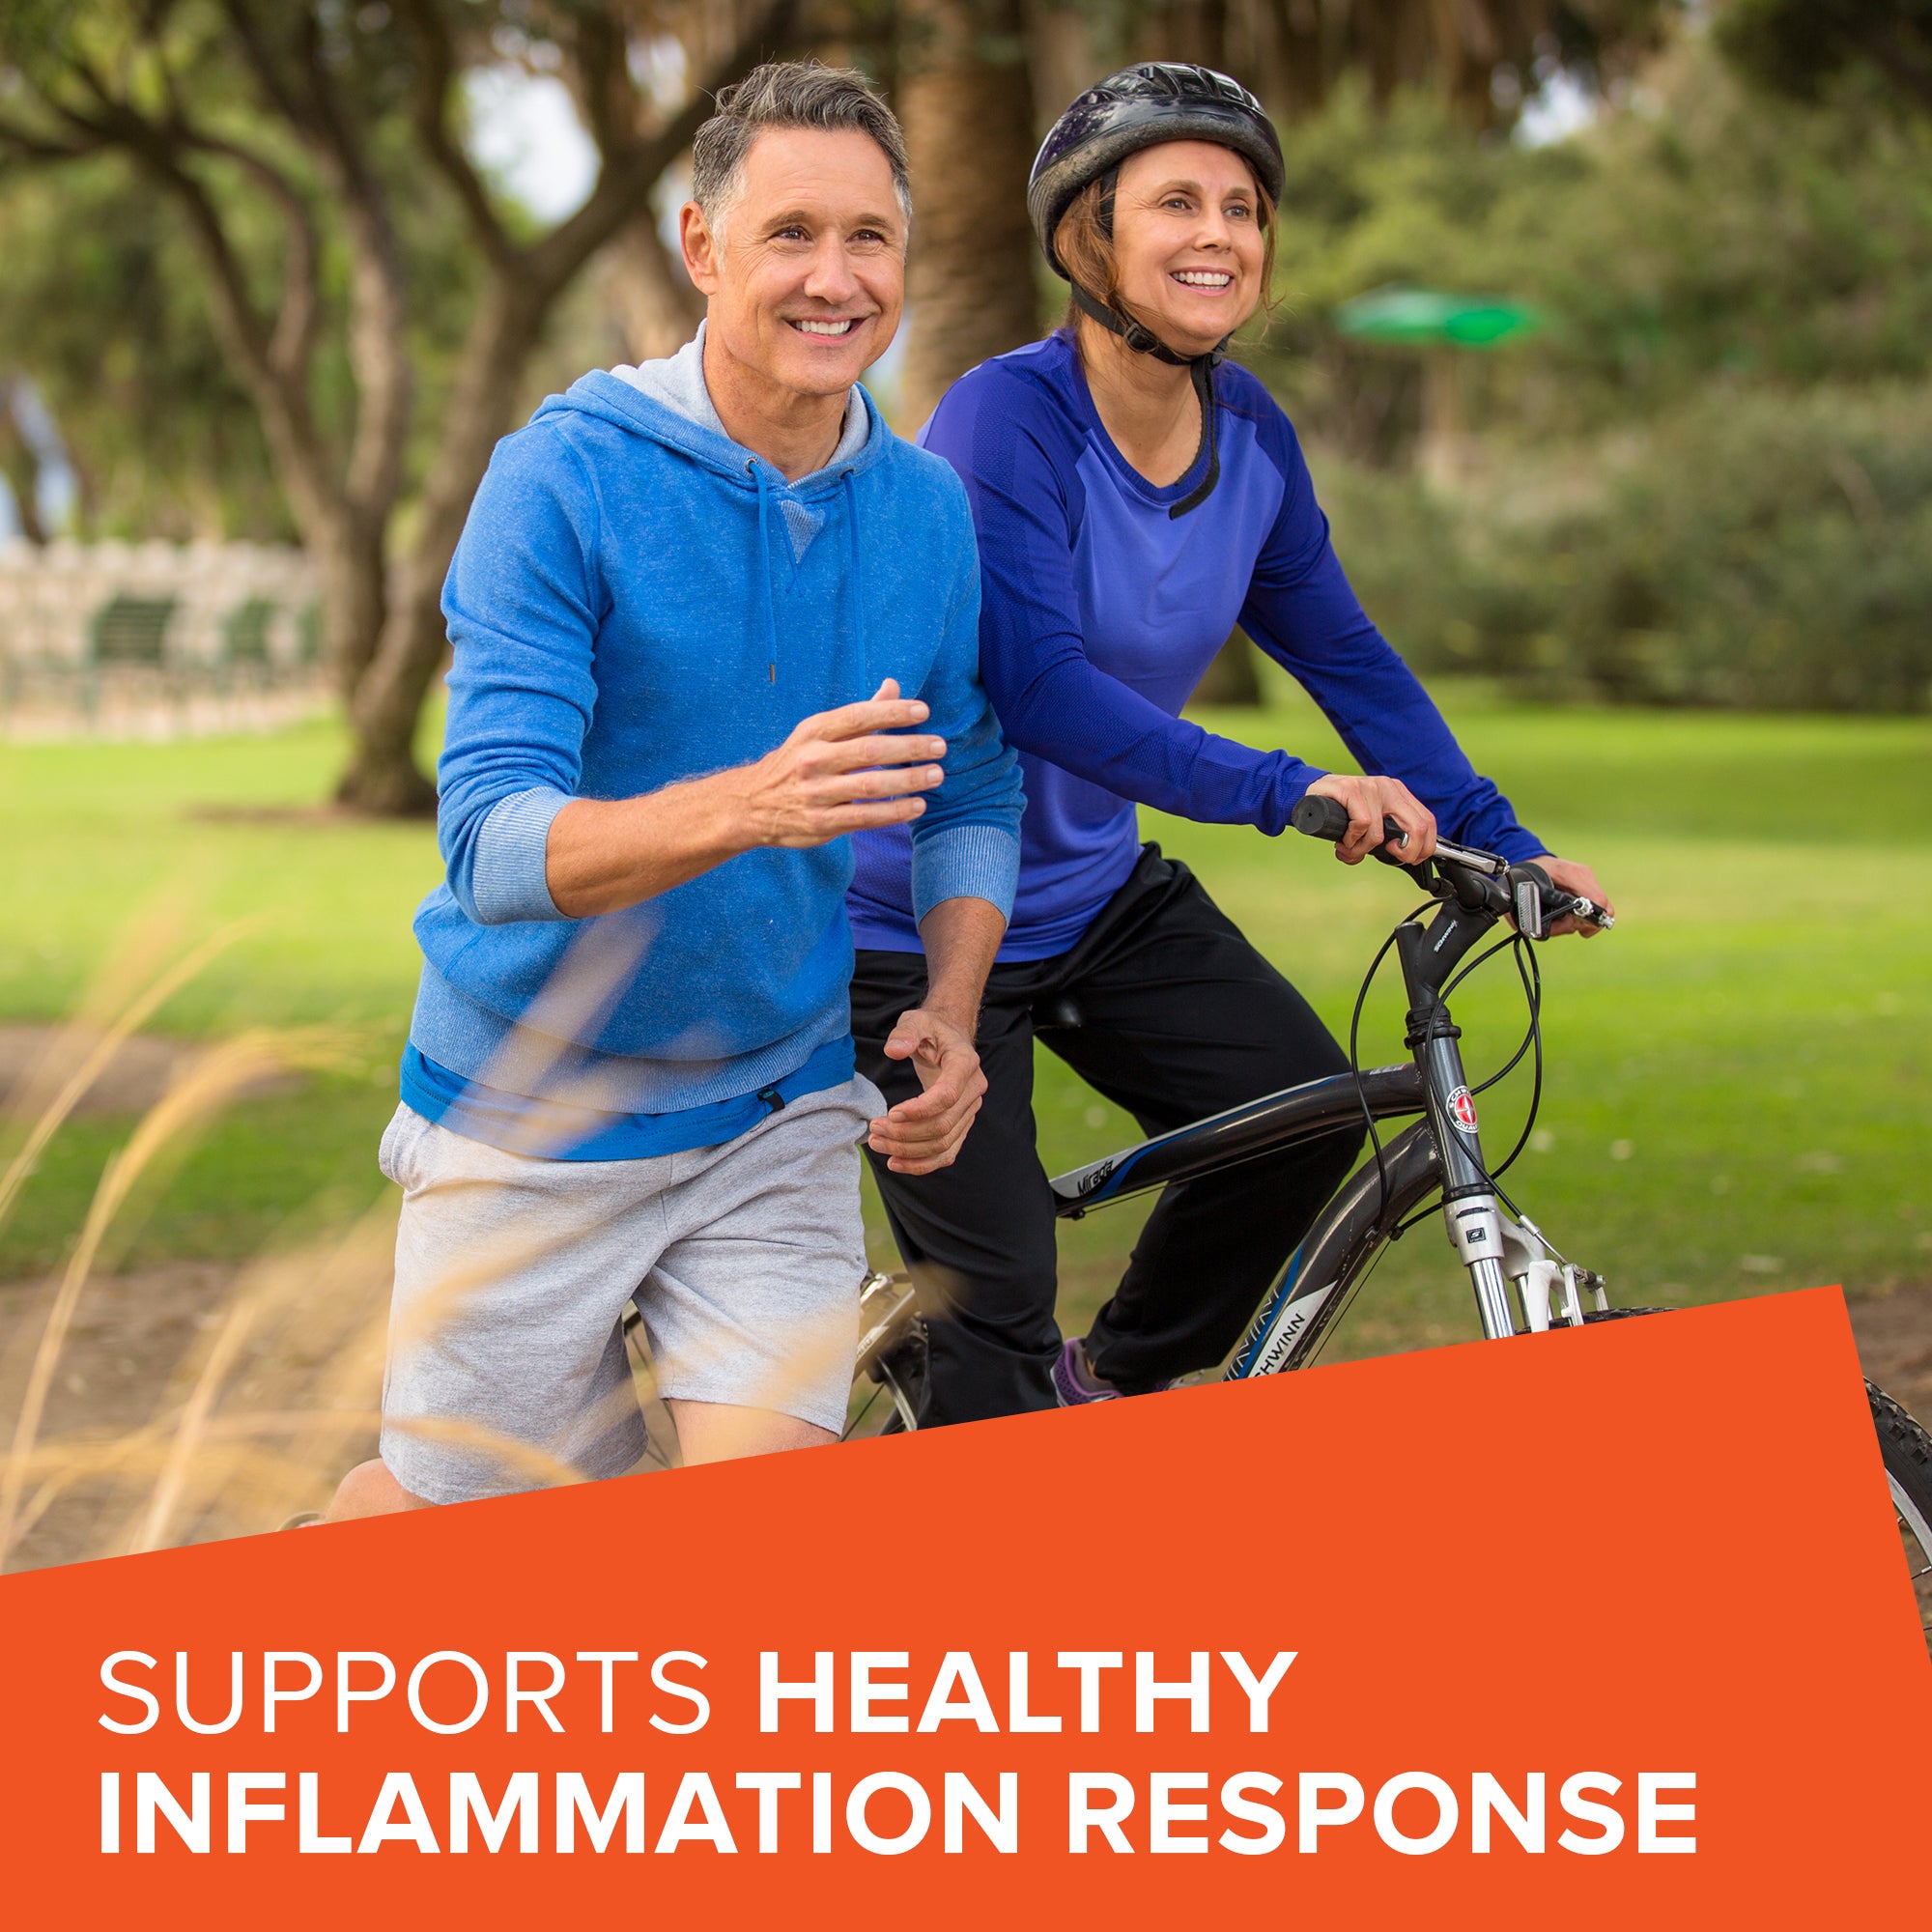 Qunol 5-in-1 Joint Supports healthy inflammation response